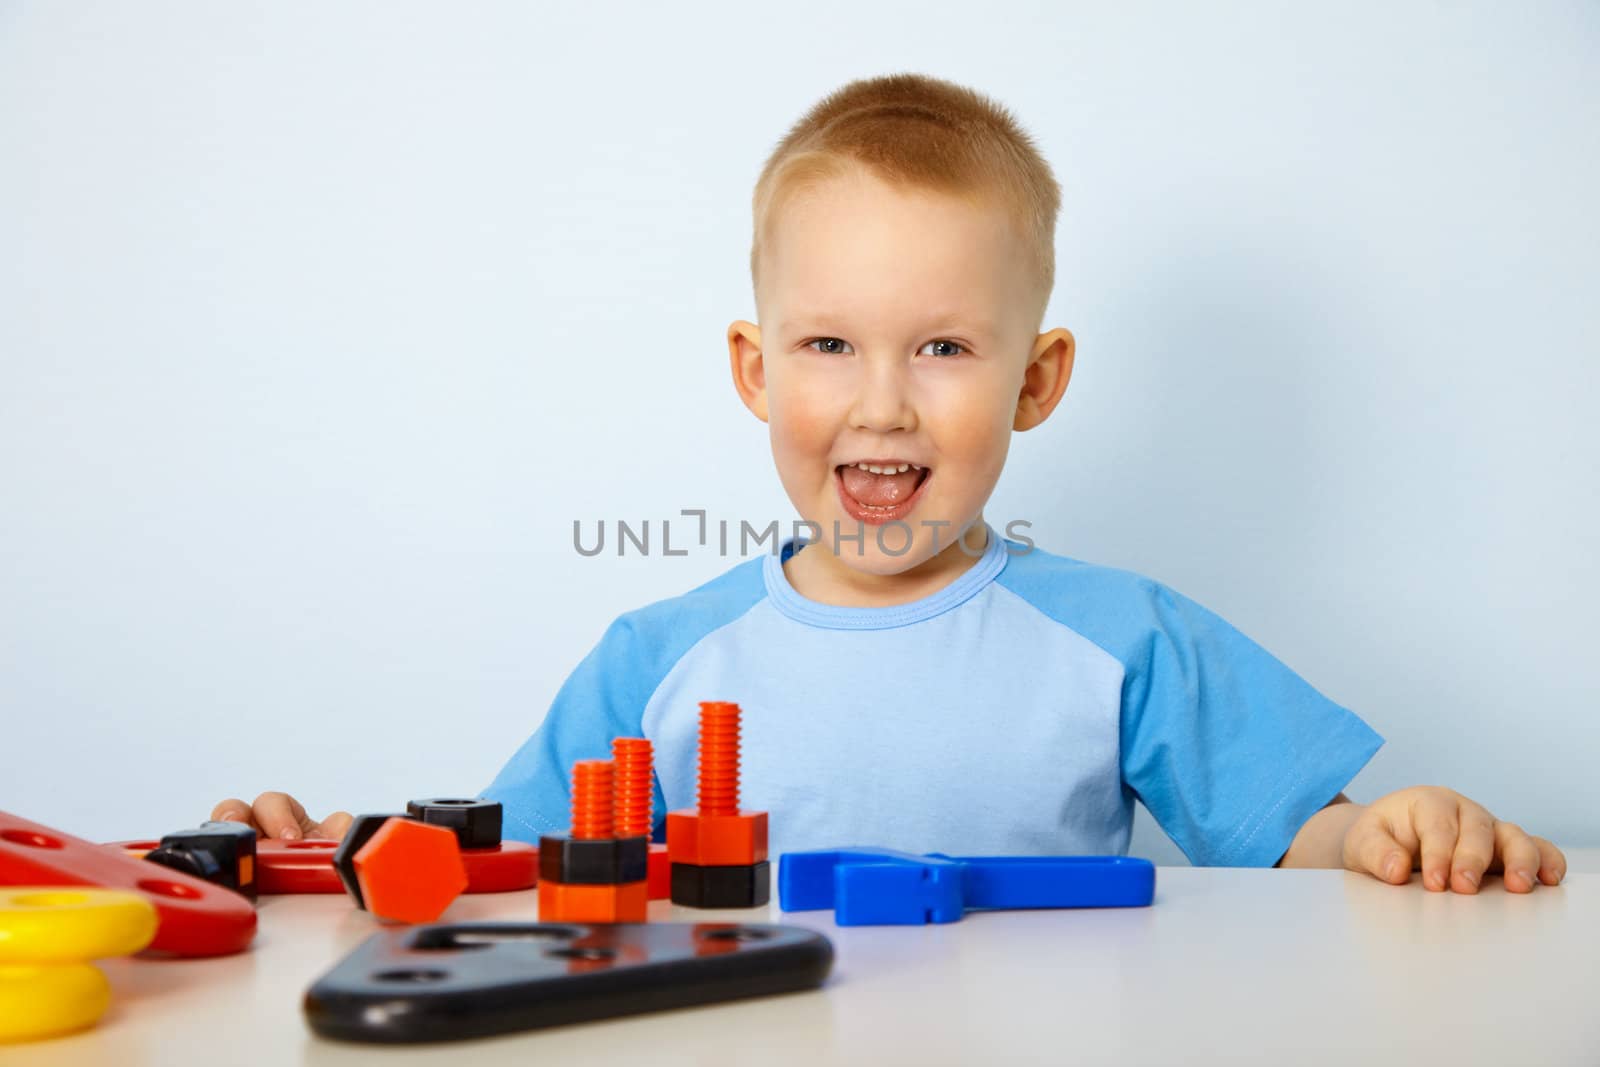 Cheery little boy playing with toys on the table